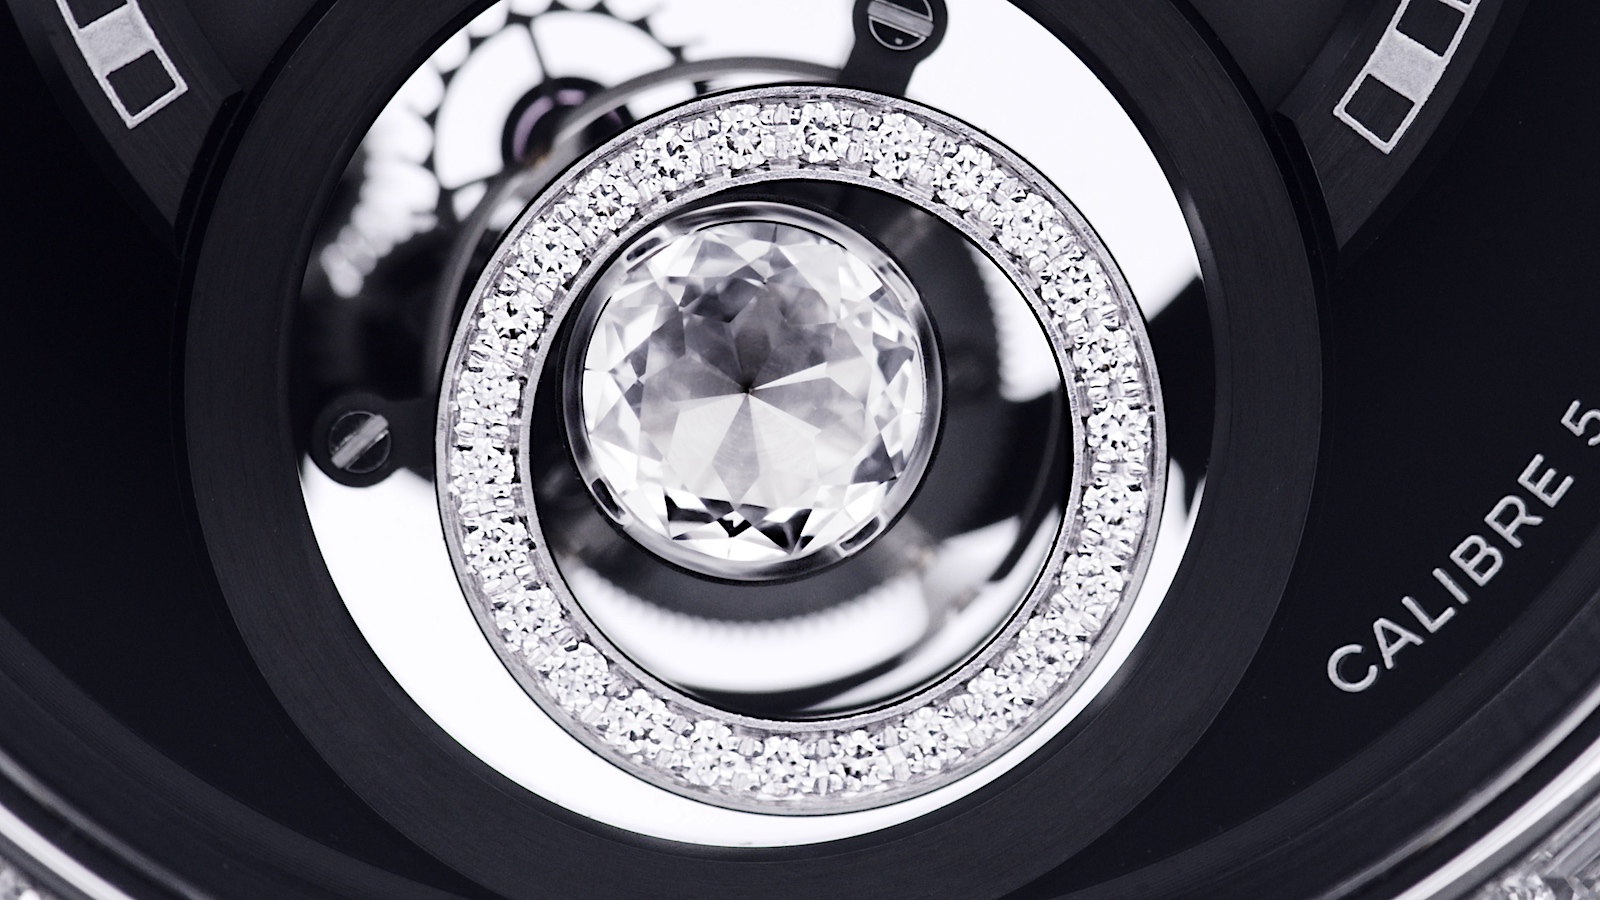 Watches & Wonders Edit: Chanel unveils new timepieces at the 2022 event,  from the J12 Diamond Tourbillon Caliber 5 and the Mademoiselle J12 La  Pausa, to the Boyfriend Skeleton Red Edition